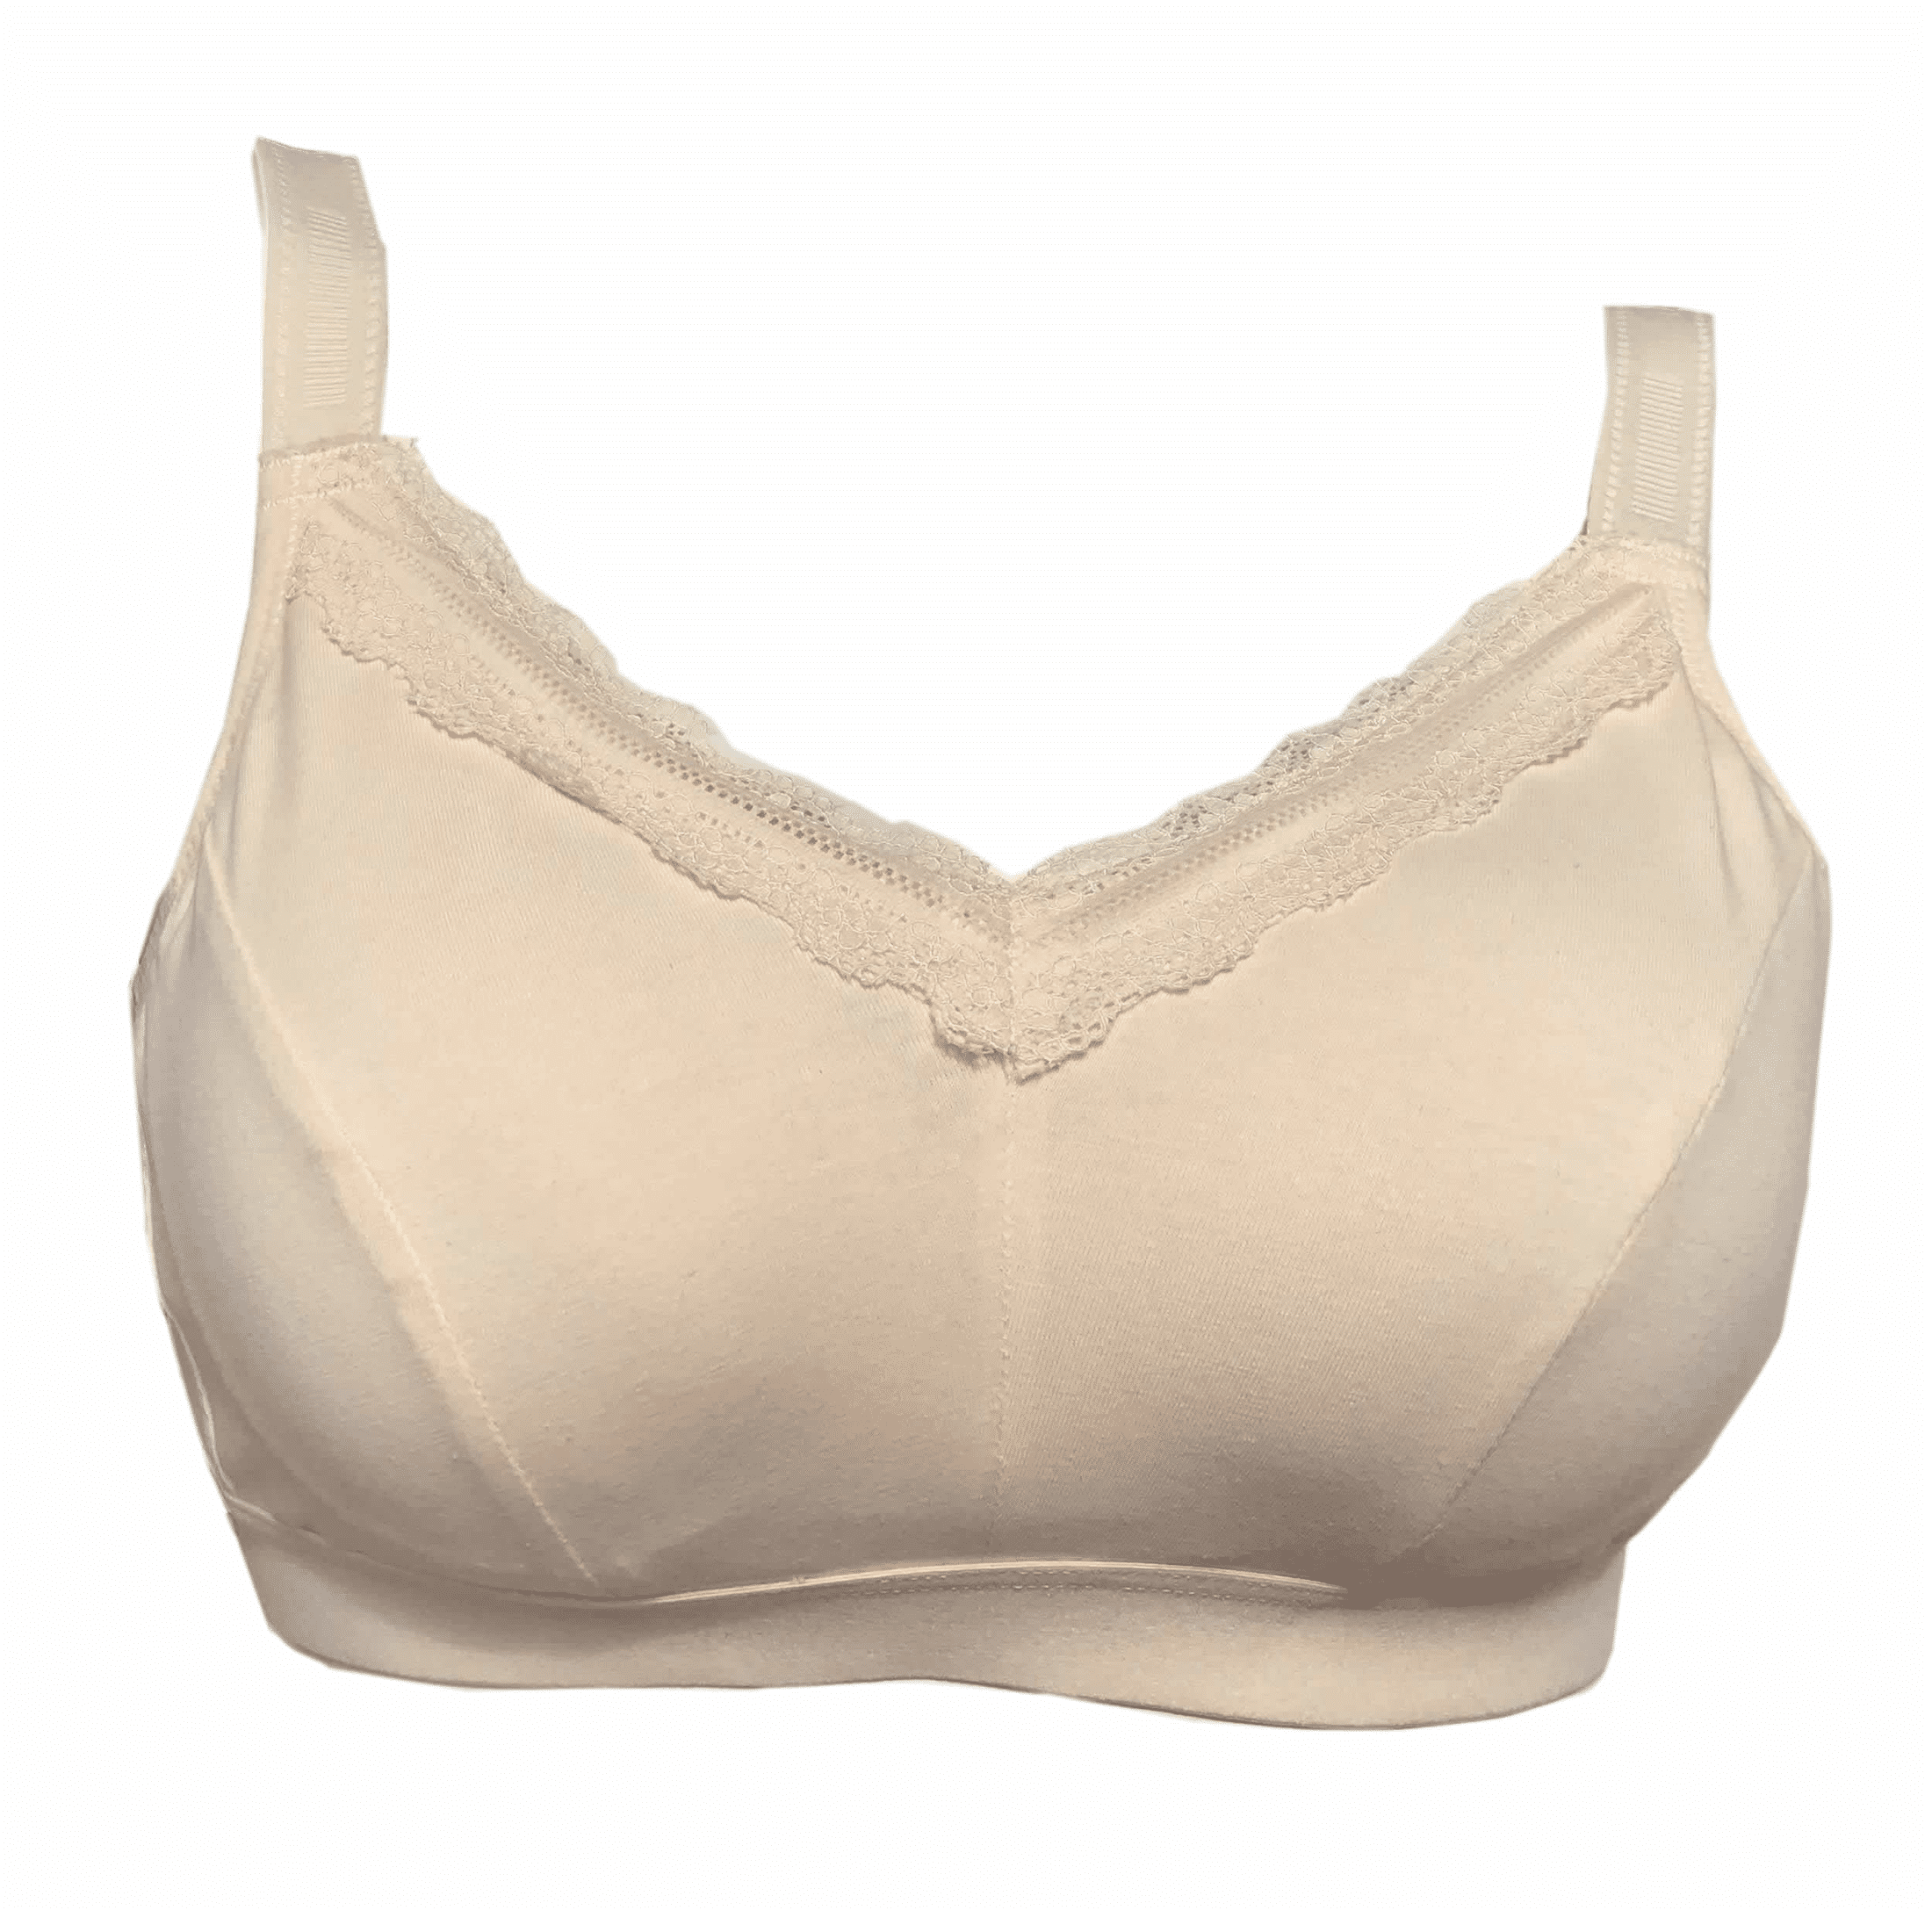 BIMEI Women's Mastectomy Bra Molded-Cup Post Surgery for Silicone Breast  Prosthesis with Pockets Everyday Bra 9816,Beige,38C 